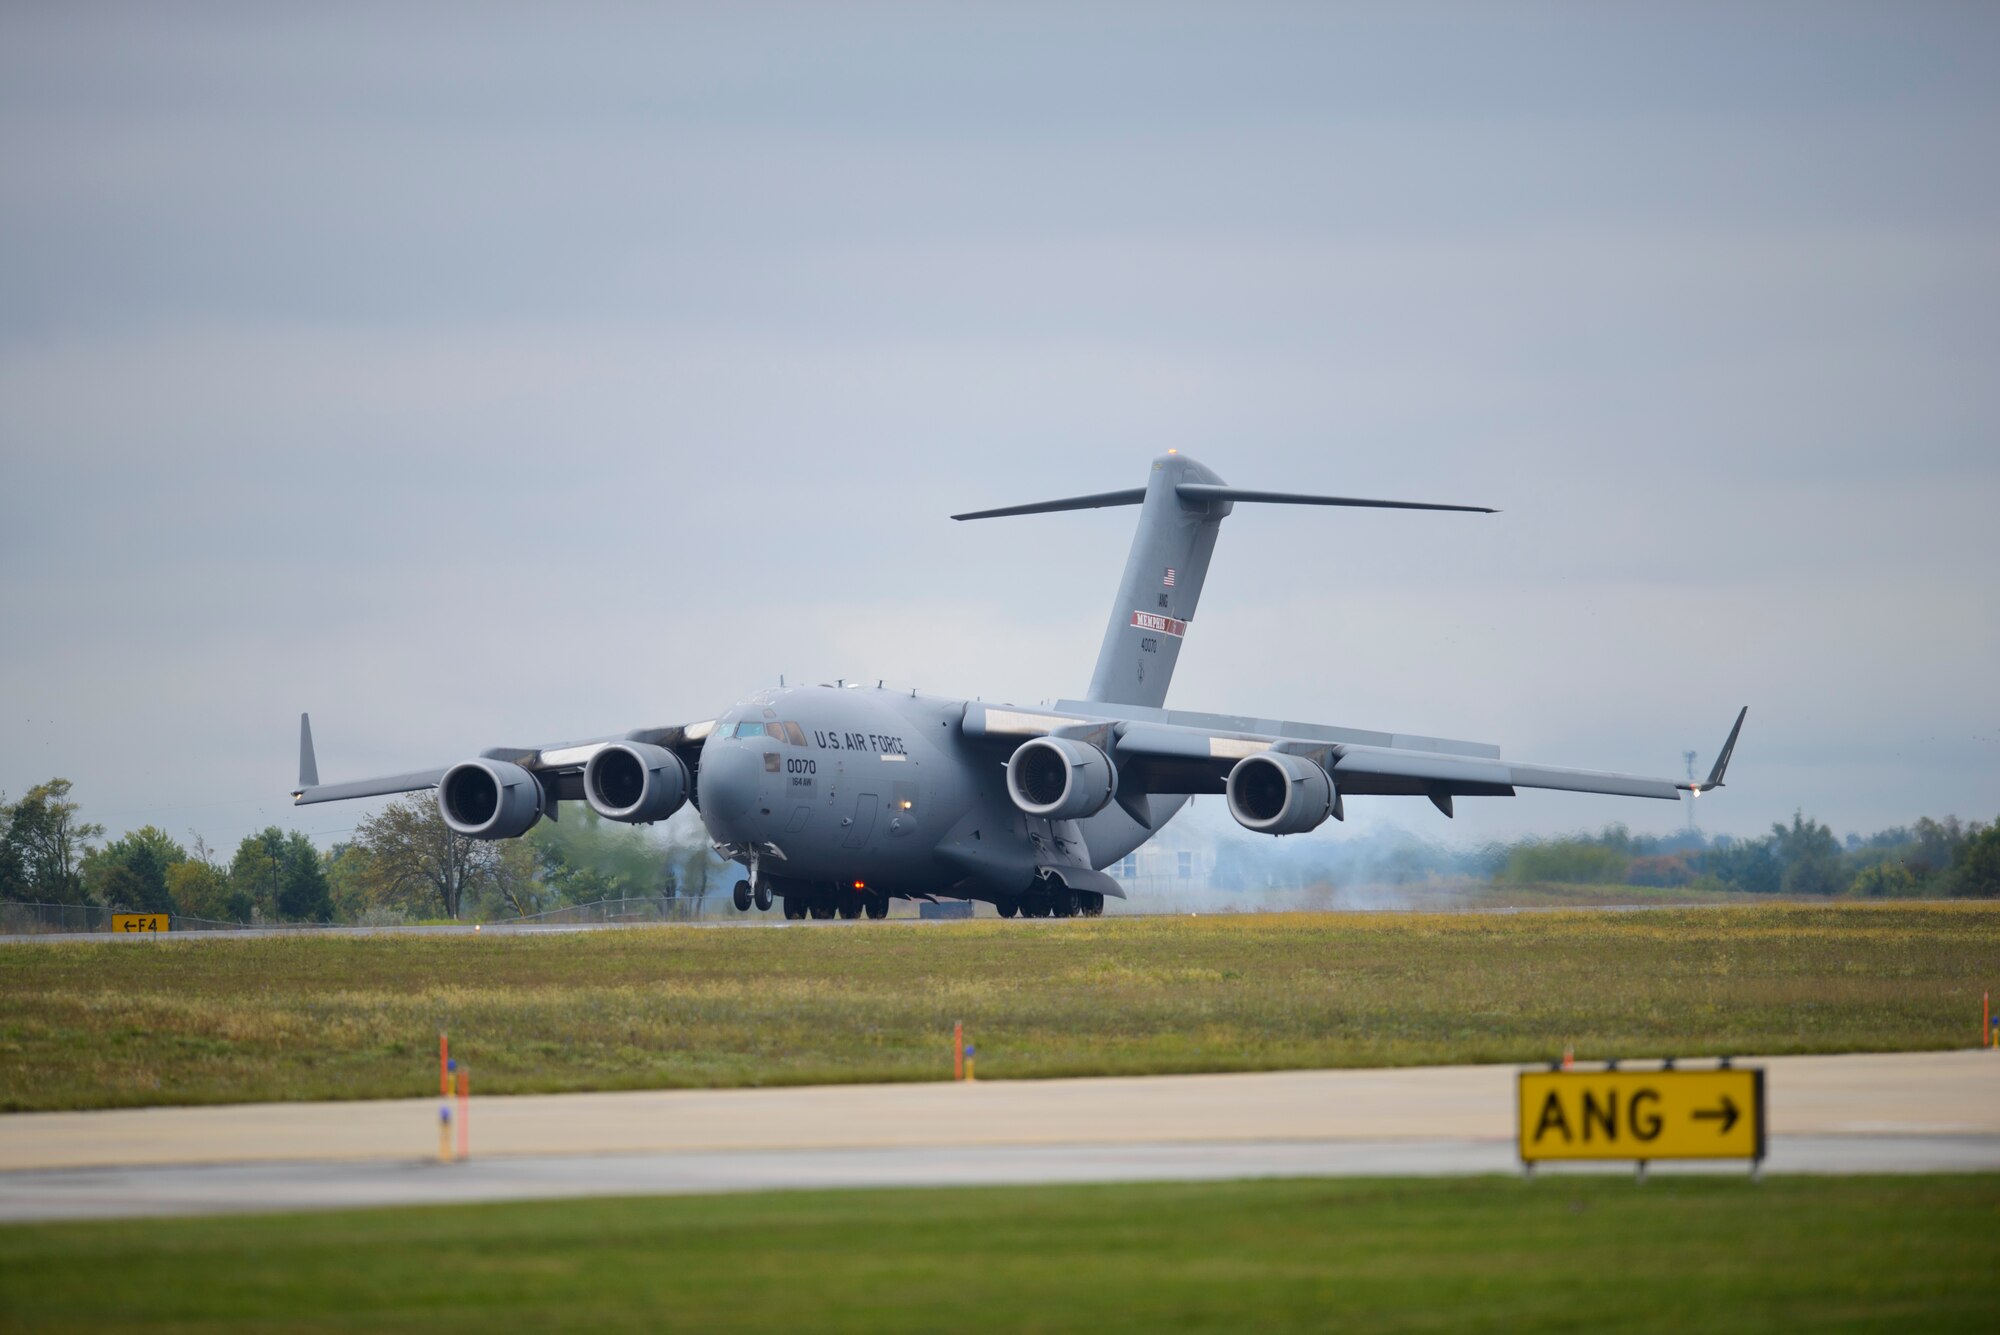 A C-17 Globemaster III touches down at Shepherd Field, Sept. 25, 2014. The aircraft was the first C-17 to be assigned to the 167th Airlfit Wing as it converted aircraft missions from the C-5 Galaxy to the C-17. (U.S. Air National Guard photo by Texh. Sgt. Michael Dickson)